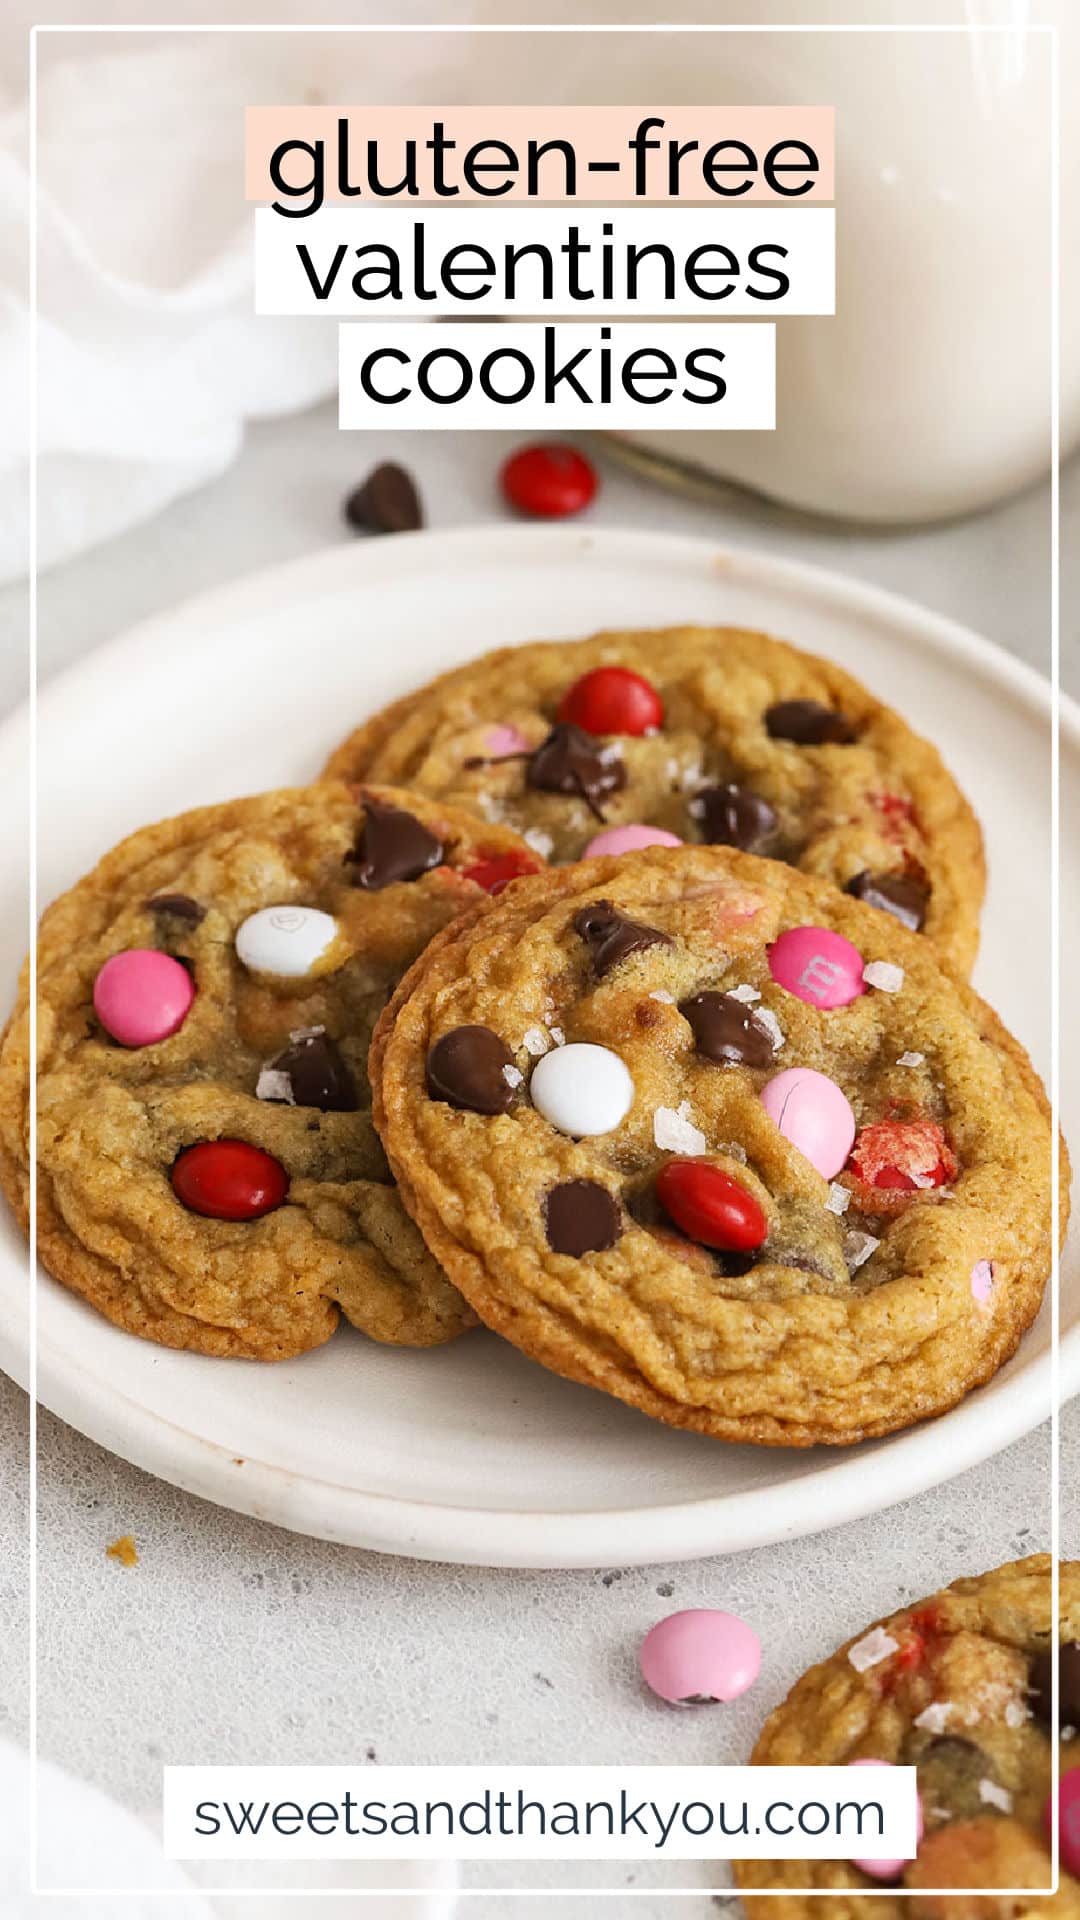 Our Gluten-Free Valentines Cookies recipe is a delightful sweet treat for a Valentine's day party or celebration. With a mix of chocolate chips & colorful M&Ms in every bite, these gluten-free Valentine's Day cookies are made from simple ingredients and add a cute, colorful touch to your holiday. (Don't miss our other favorite gluten-free Valentine's Day recipes to try in the post!)